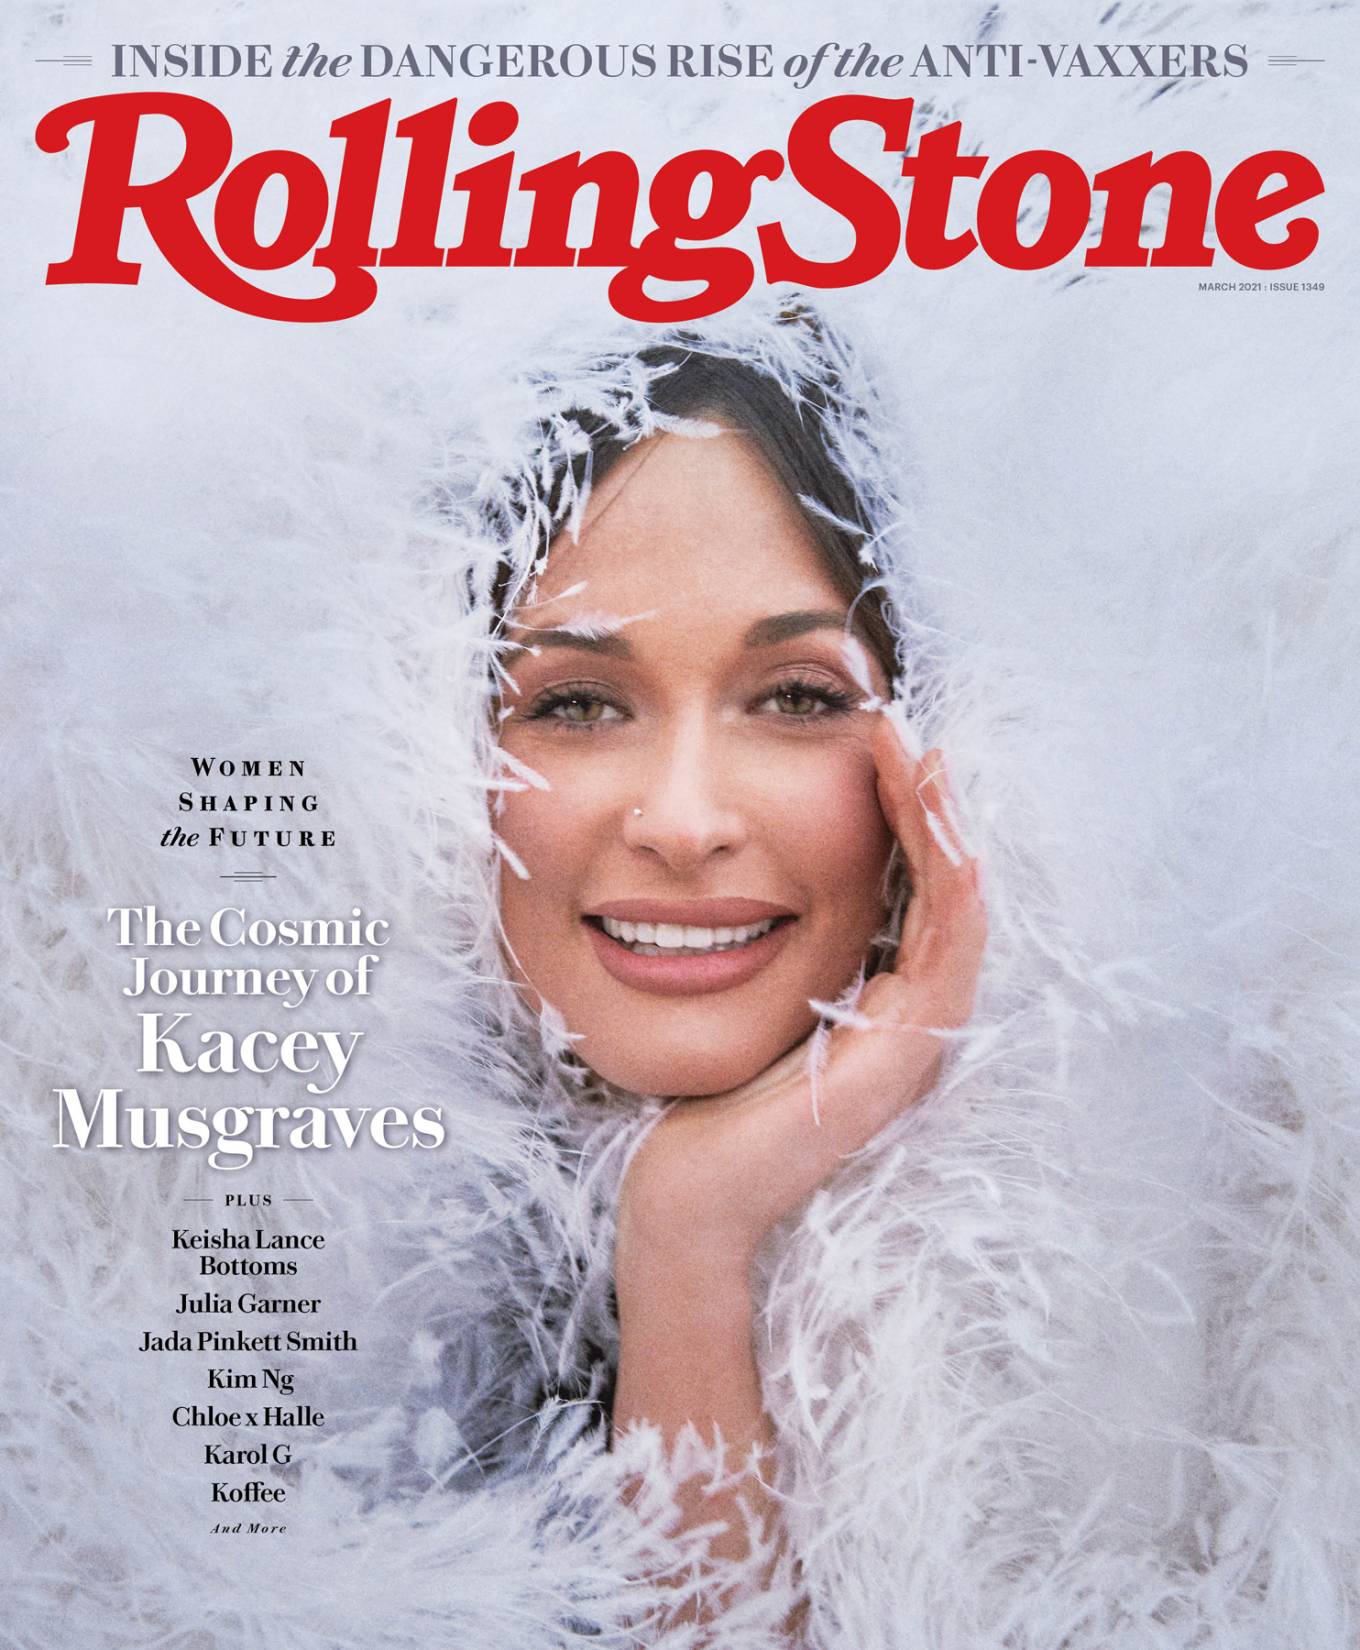 Kacey Musgraves - Rolling Stone (March 2021)